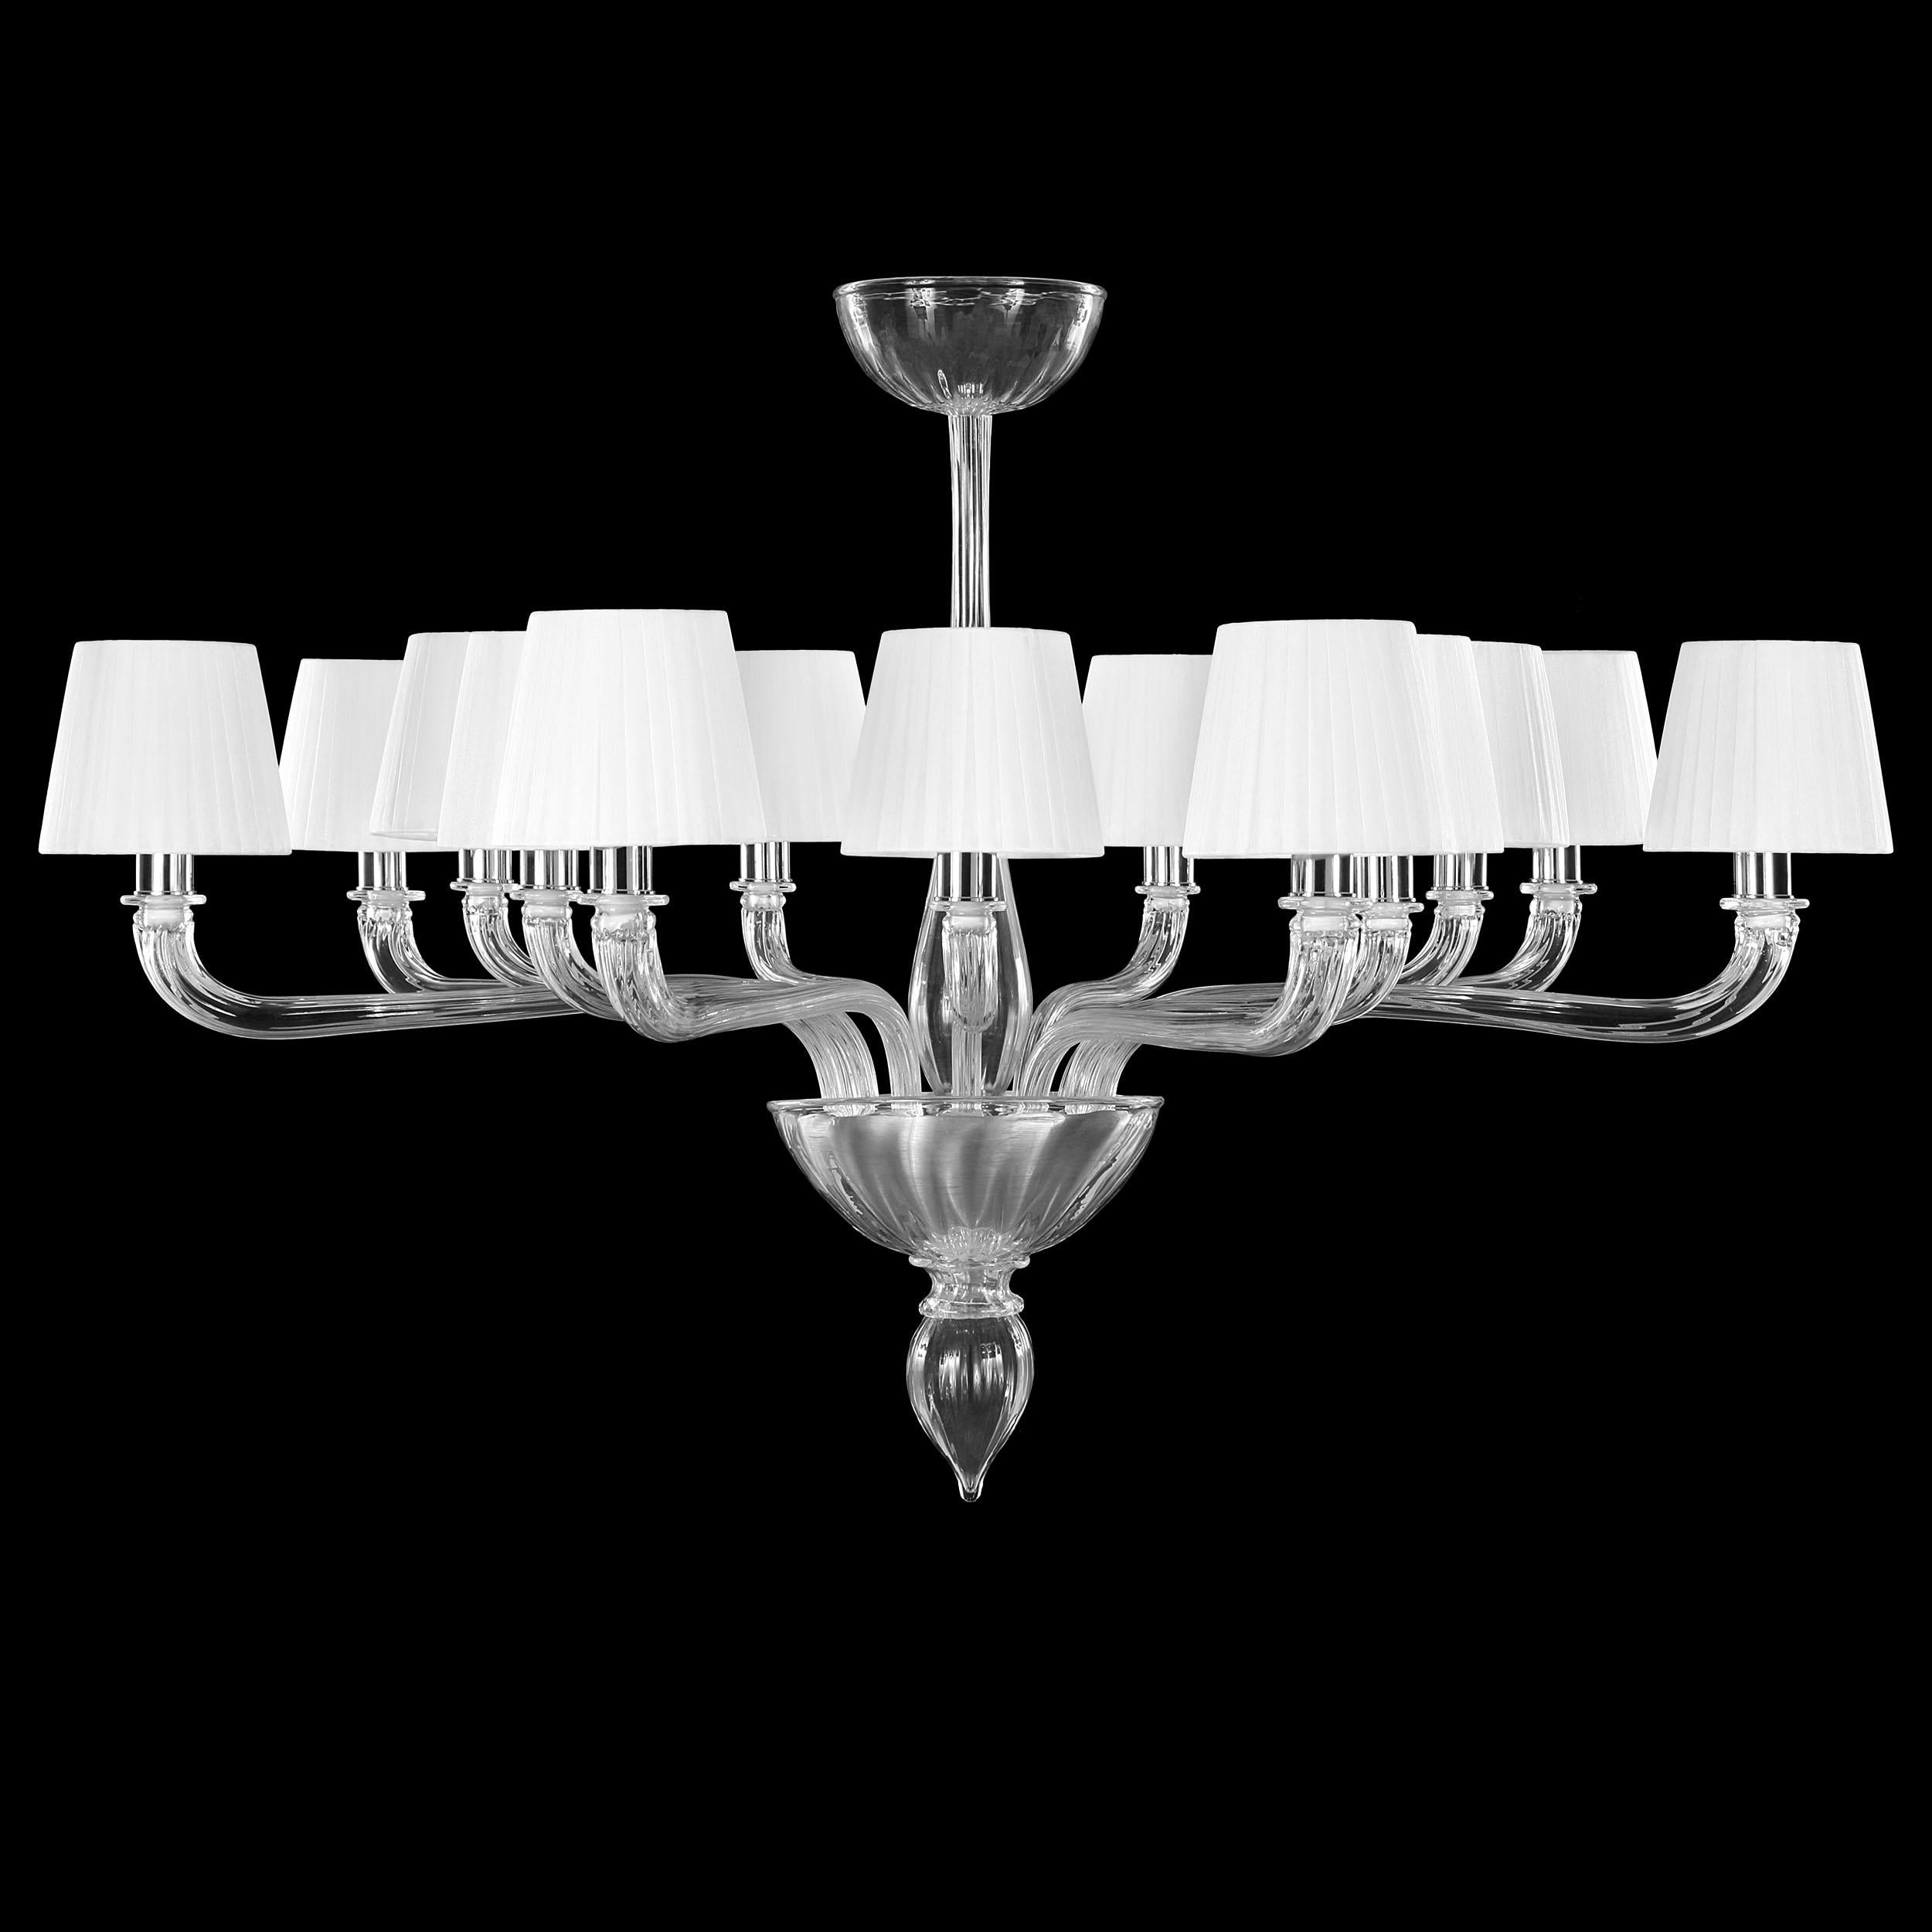 Coco chandelier 14 lights artistic clear Murano glass, white organza lampshades by Multiforme.
The glass chandeliers Coco collection takes inspiration from Coco Chanel, the revolutionary woman that has changed the fashion industry during the